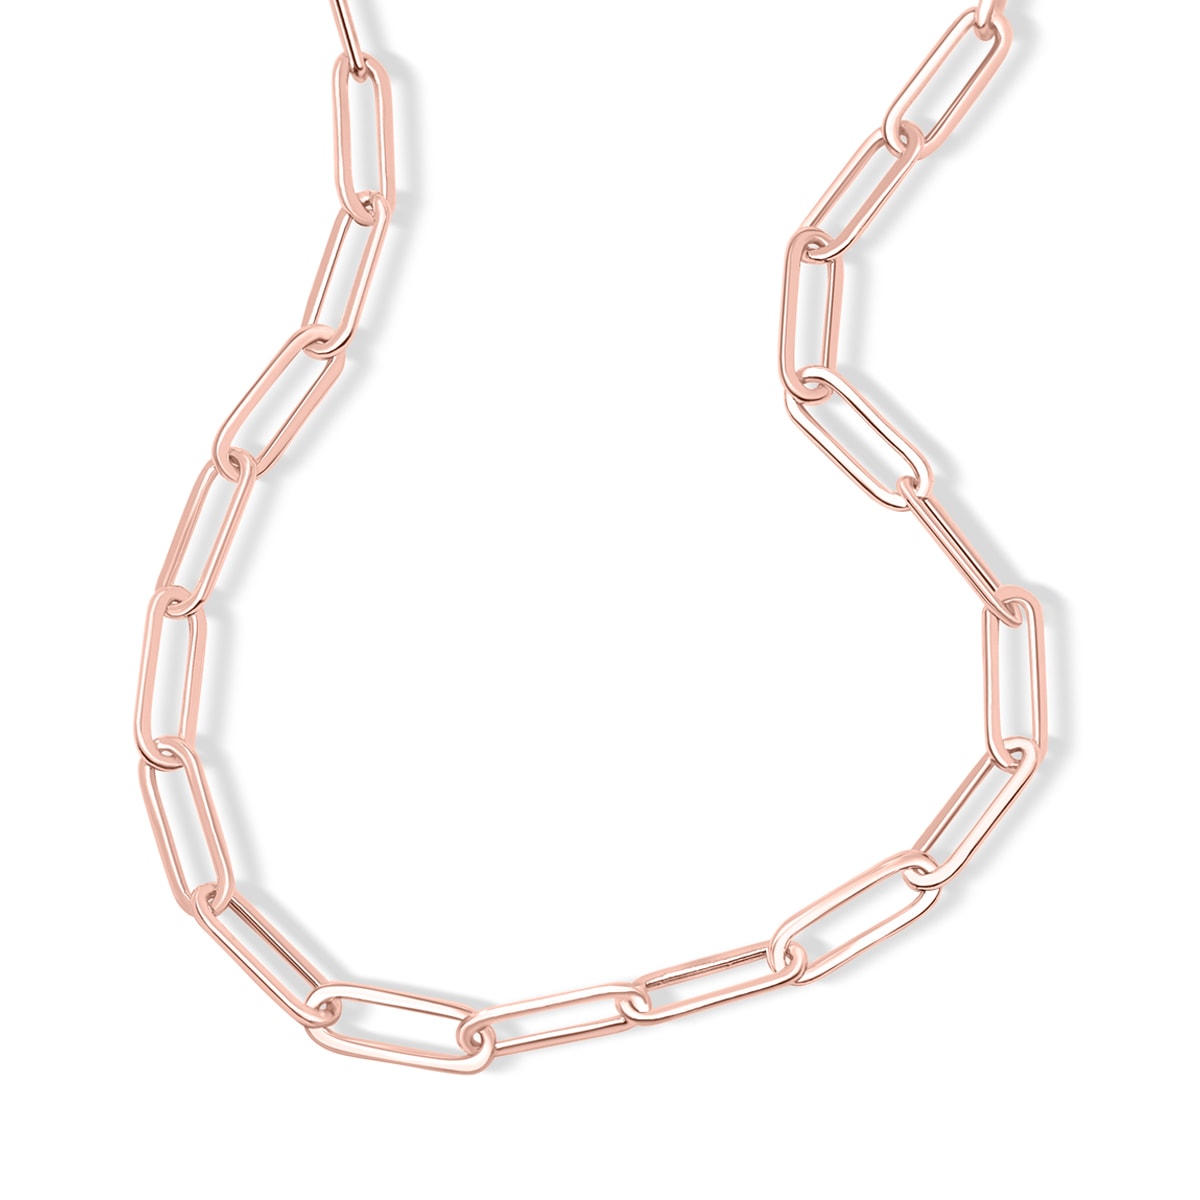 Affordable rose gold chain necklace